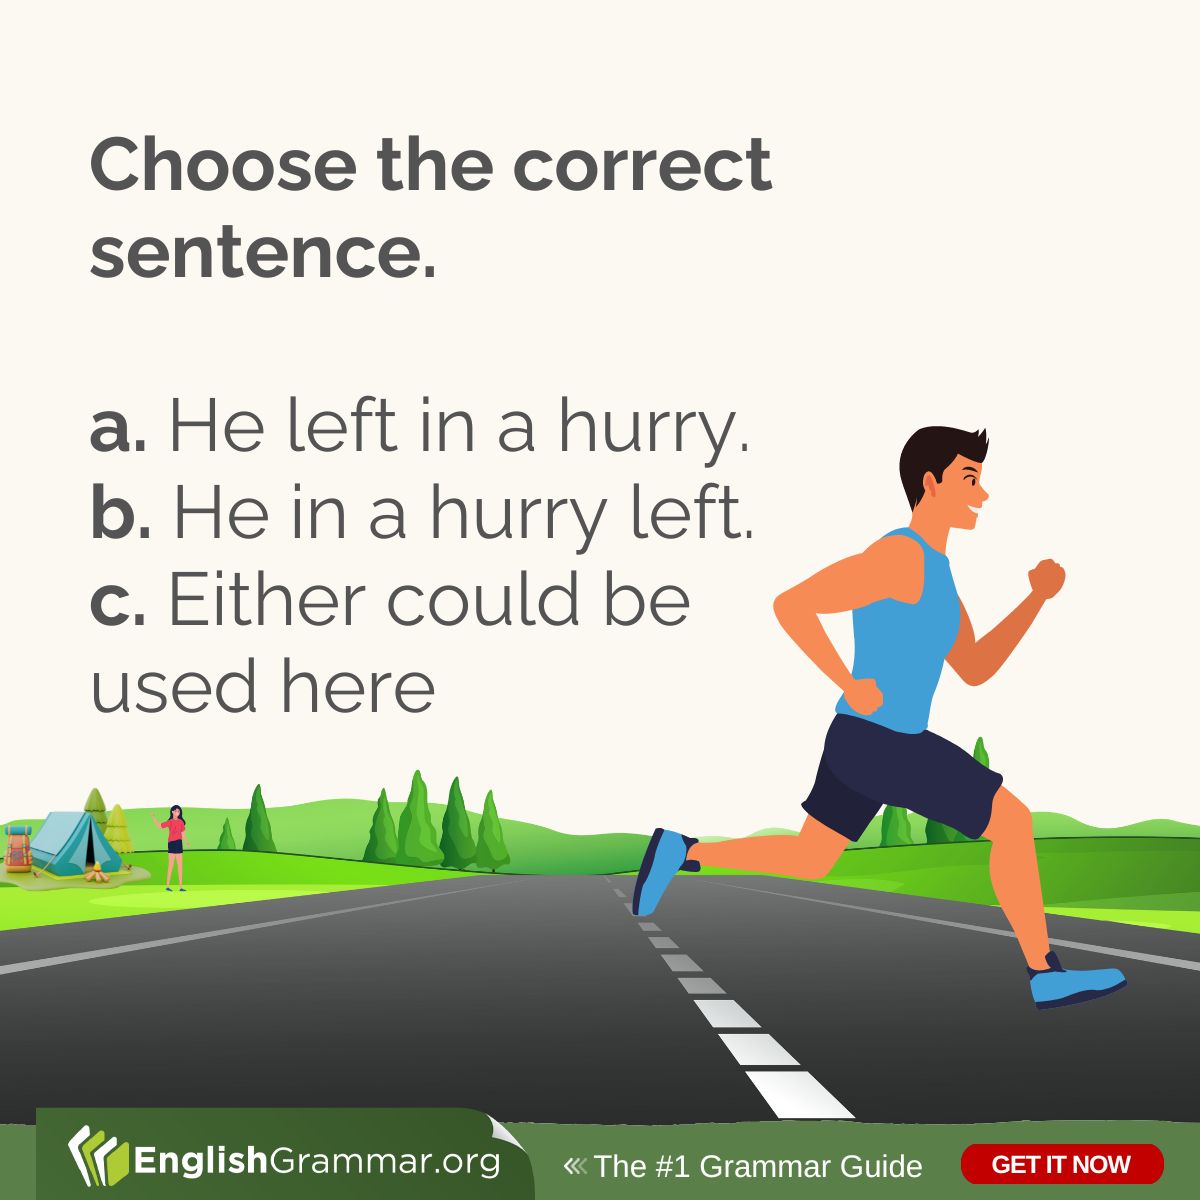 What do you think?

Find the right answer here: englishgrammar.org/focusing-adver…

#grammar #writing #amwriting